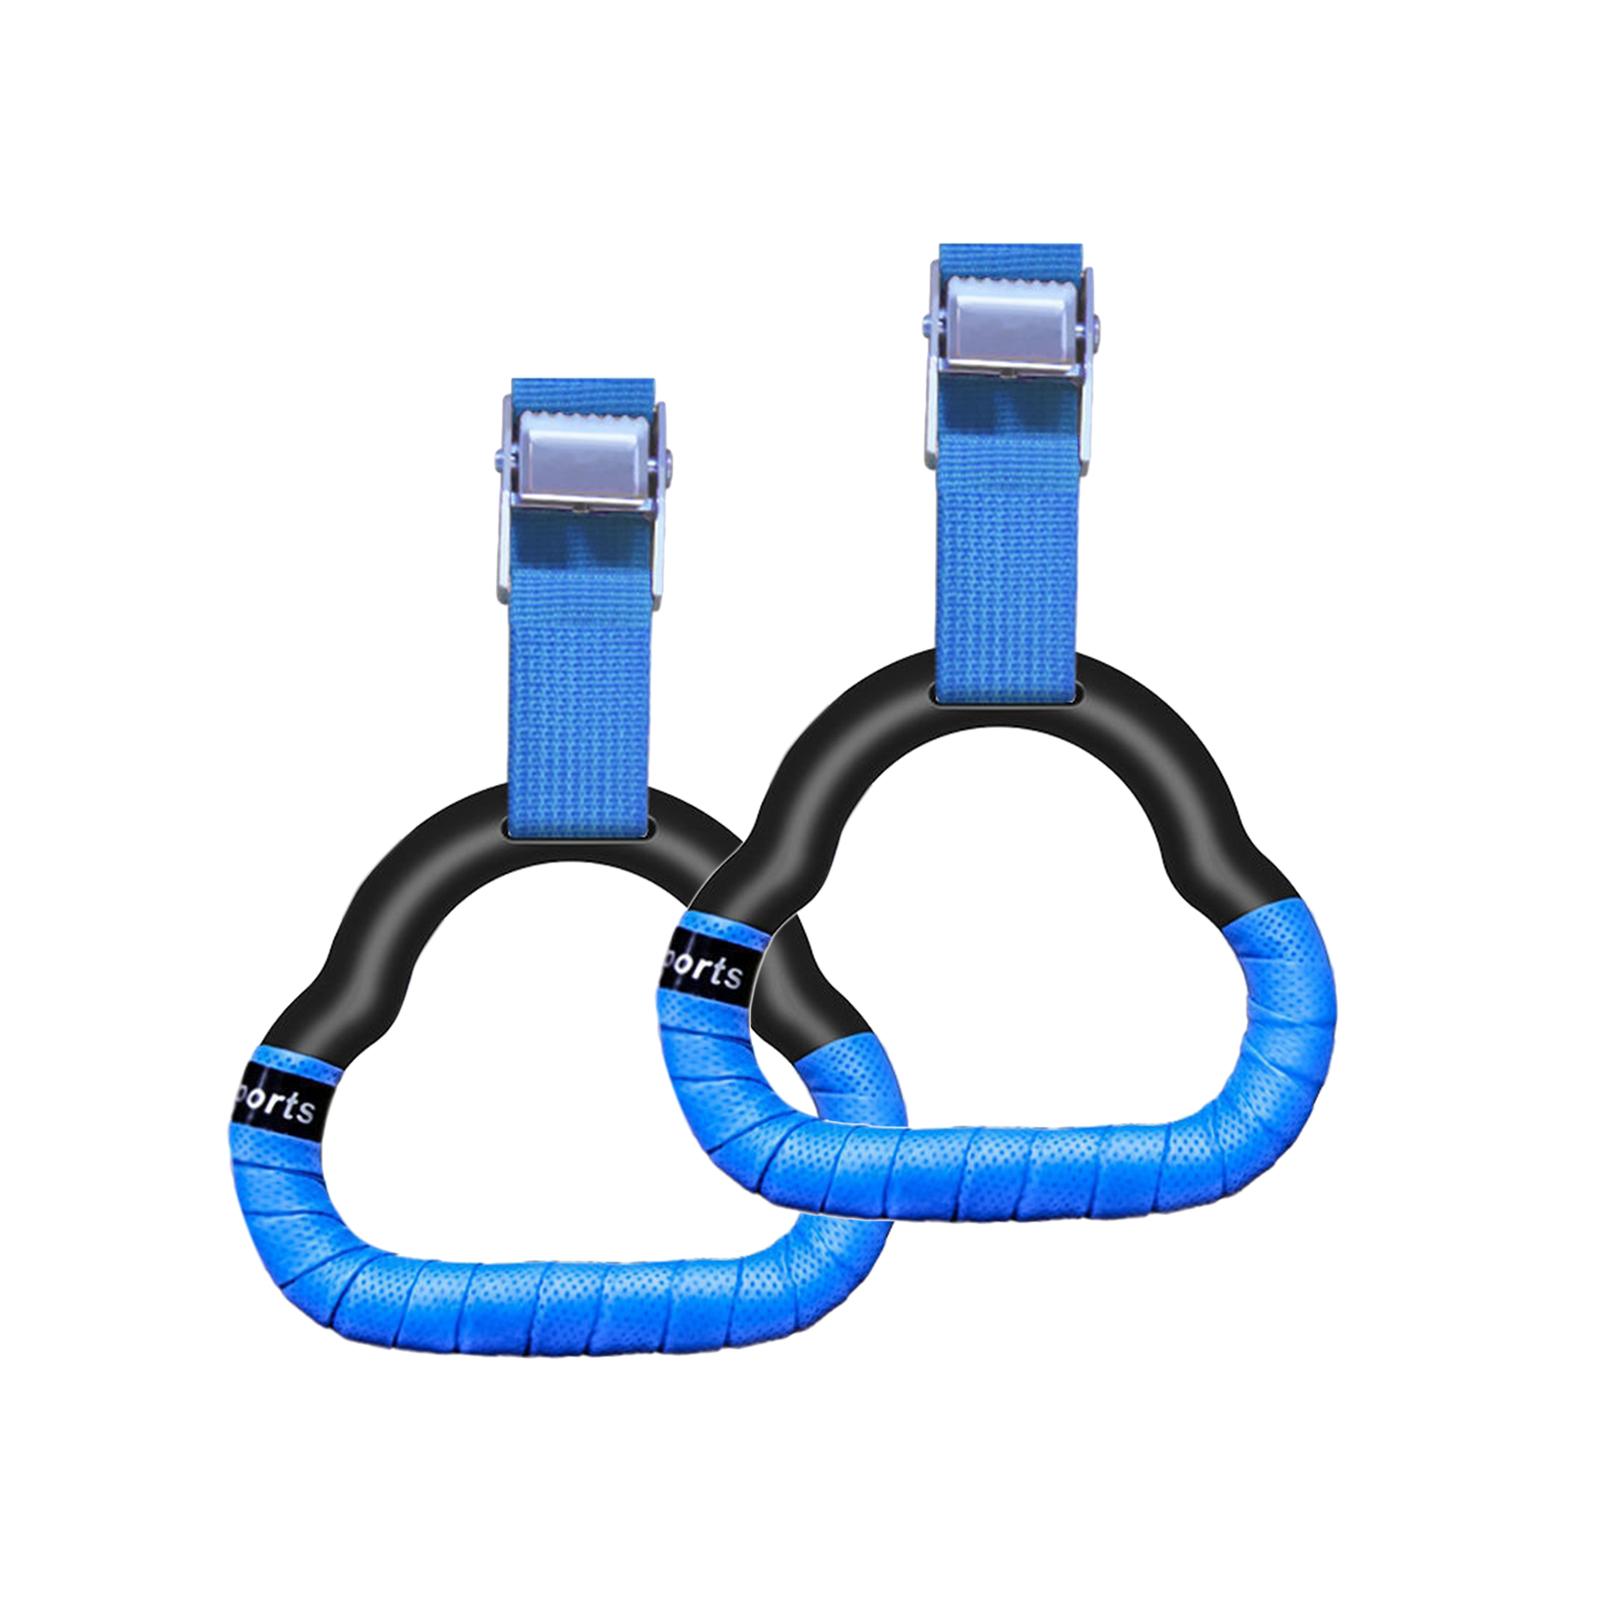 Gymnastics Rings Non Slip Home Gym Strength Training Workout Training Rings